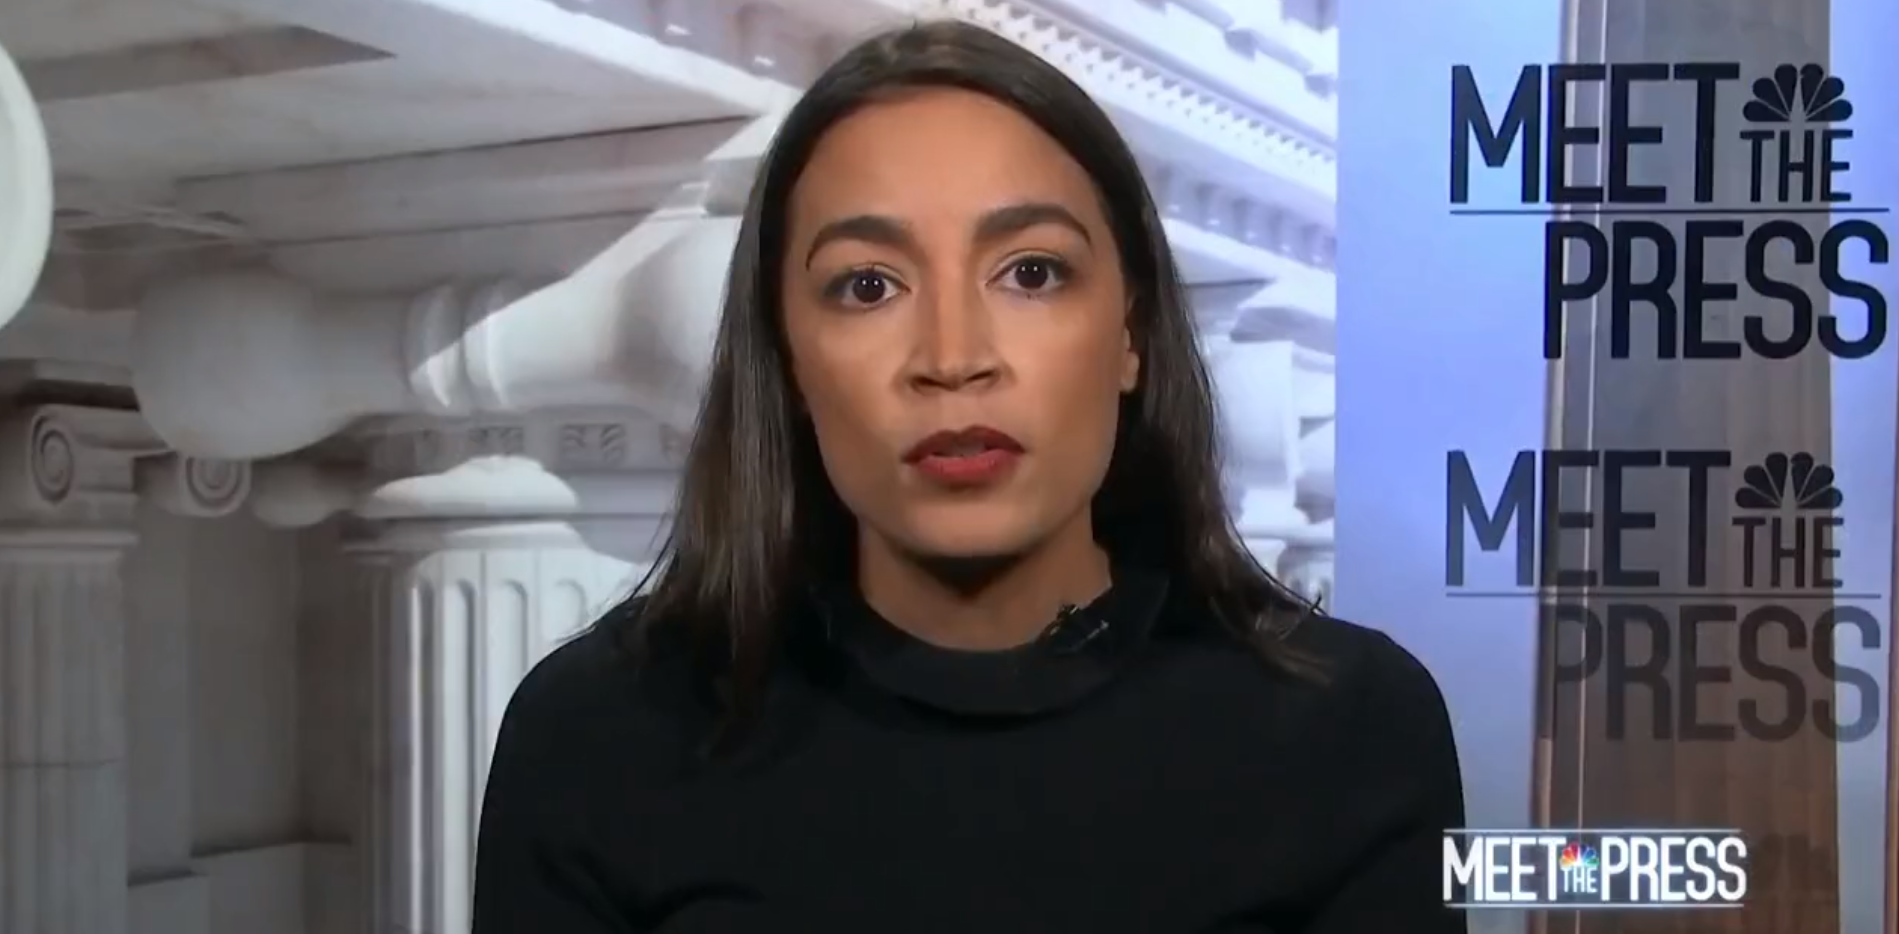 "Lying under oath is an impeachable offense," Rep. Alexandria Ocasio-Cortez (D-N.Y.) told "Meet the Press" on June 26, 2022.